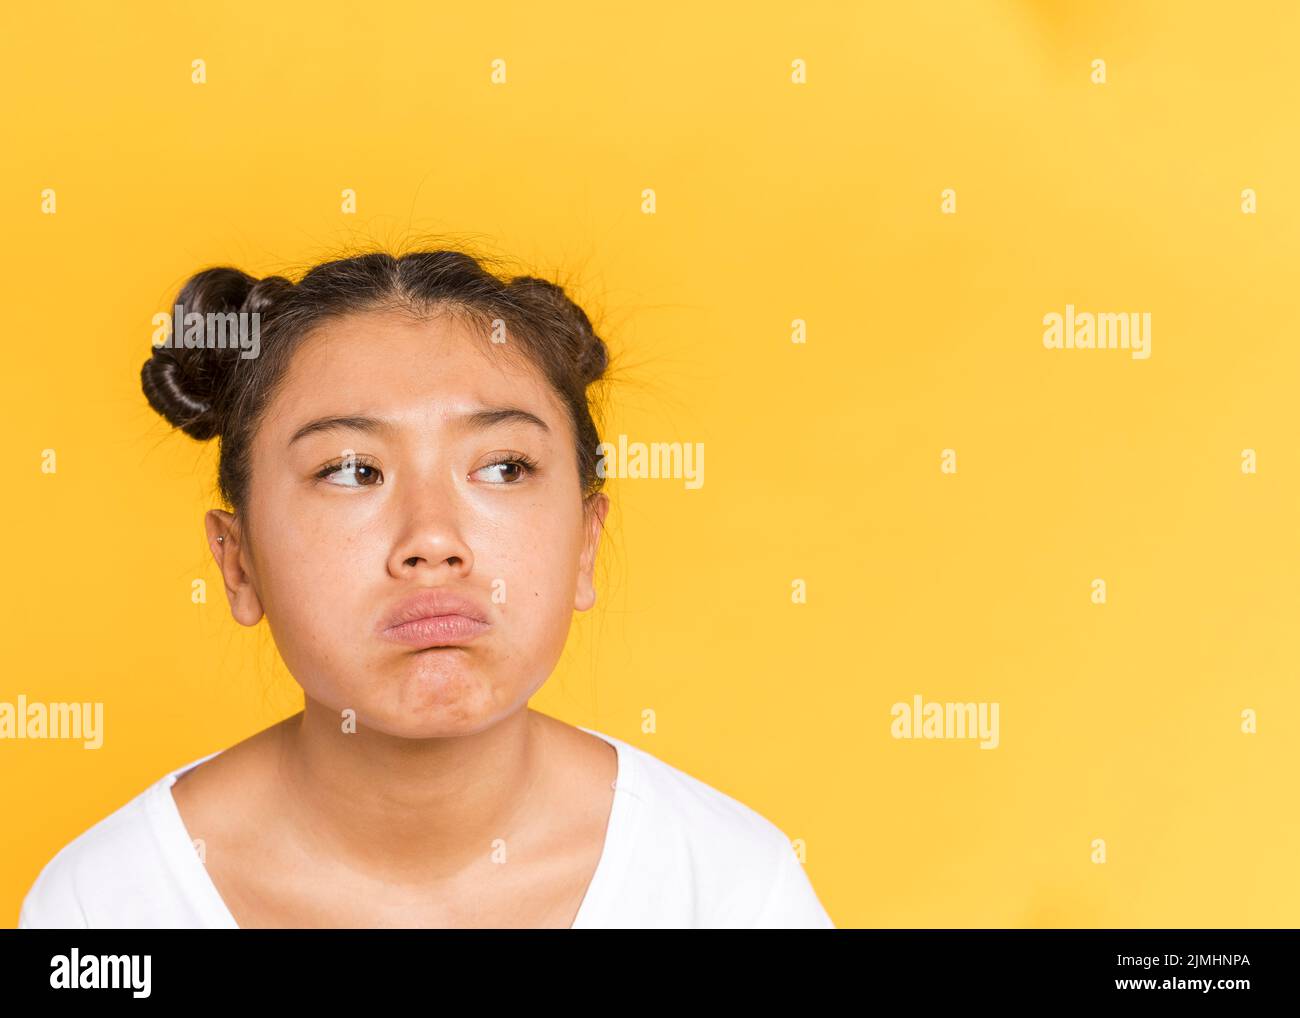 Sad asian woman with tied hair copy space Stock Photo